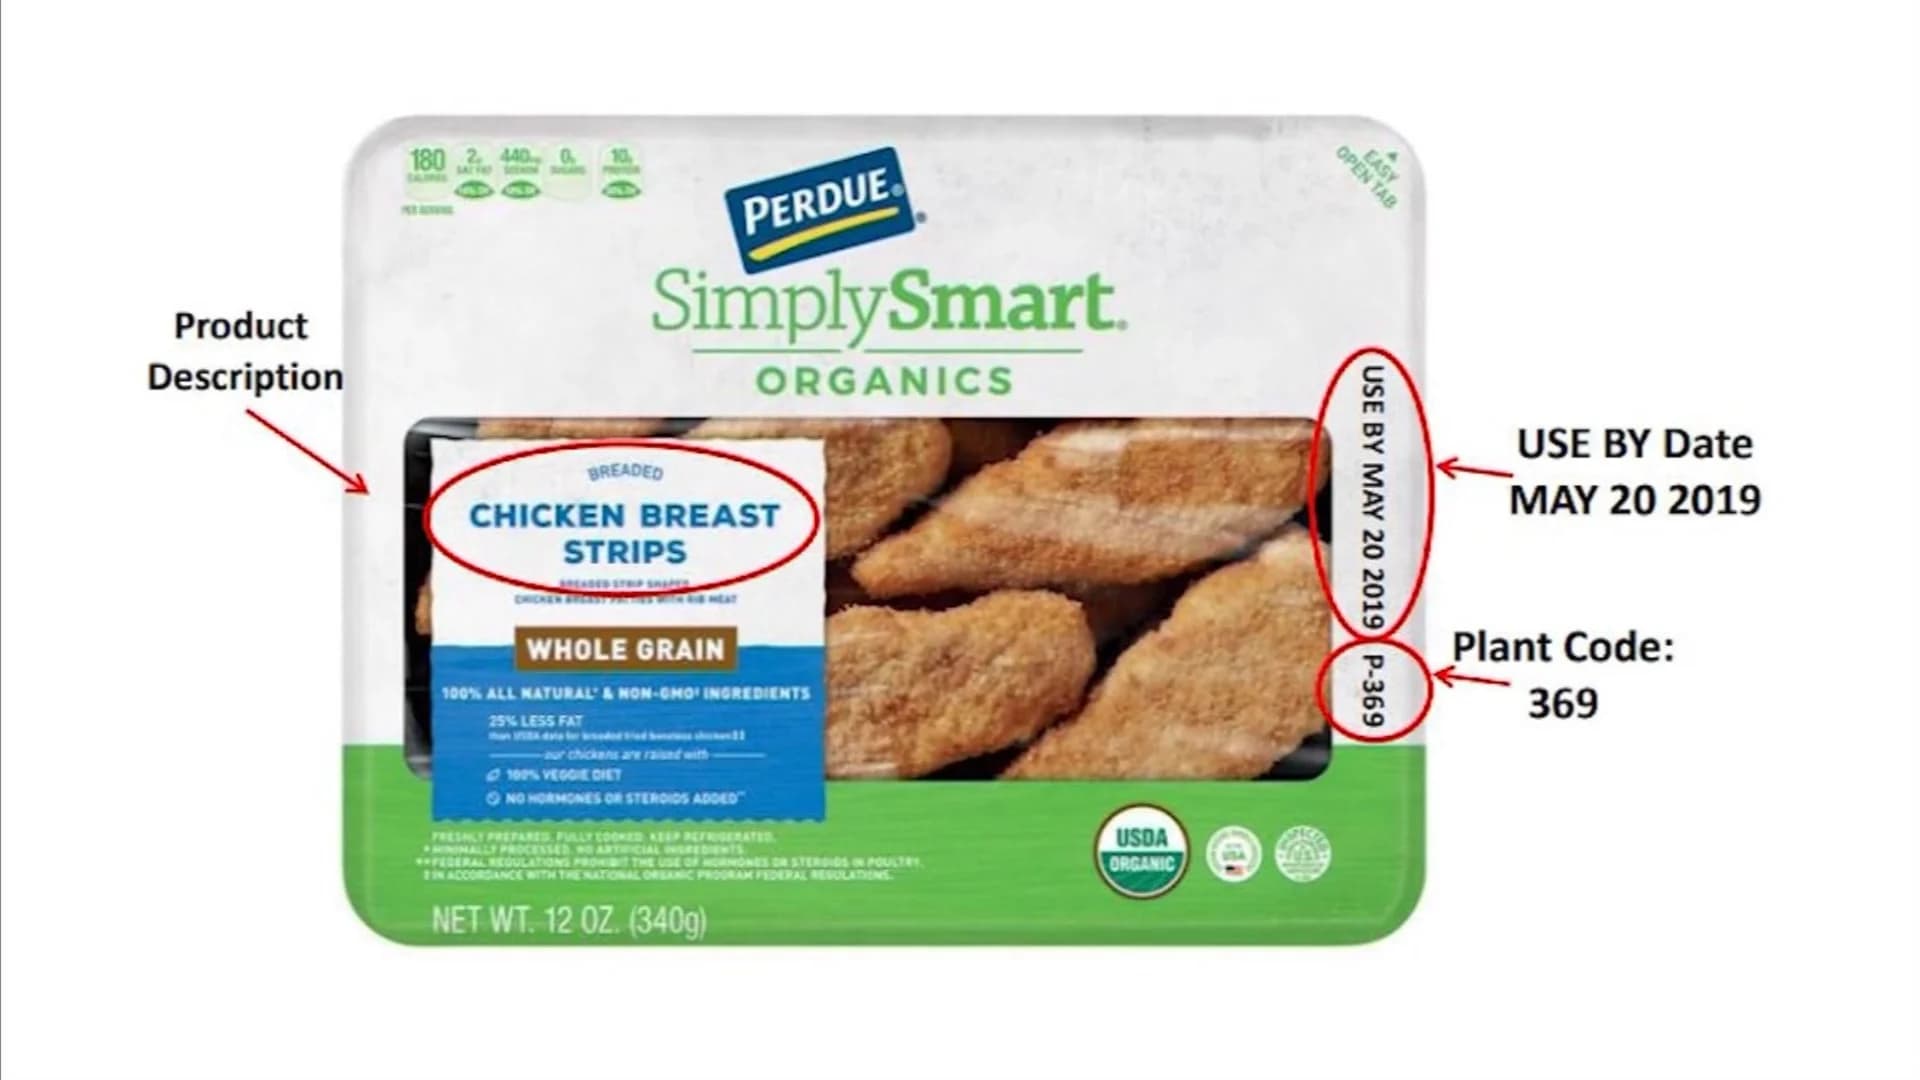 More than 31K pounds of chicken products recalled for possible contamination